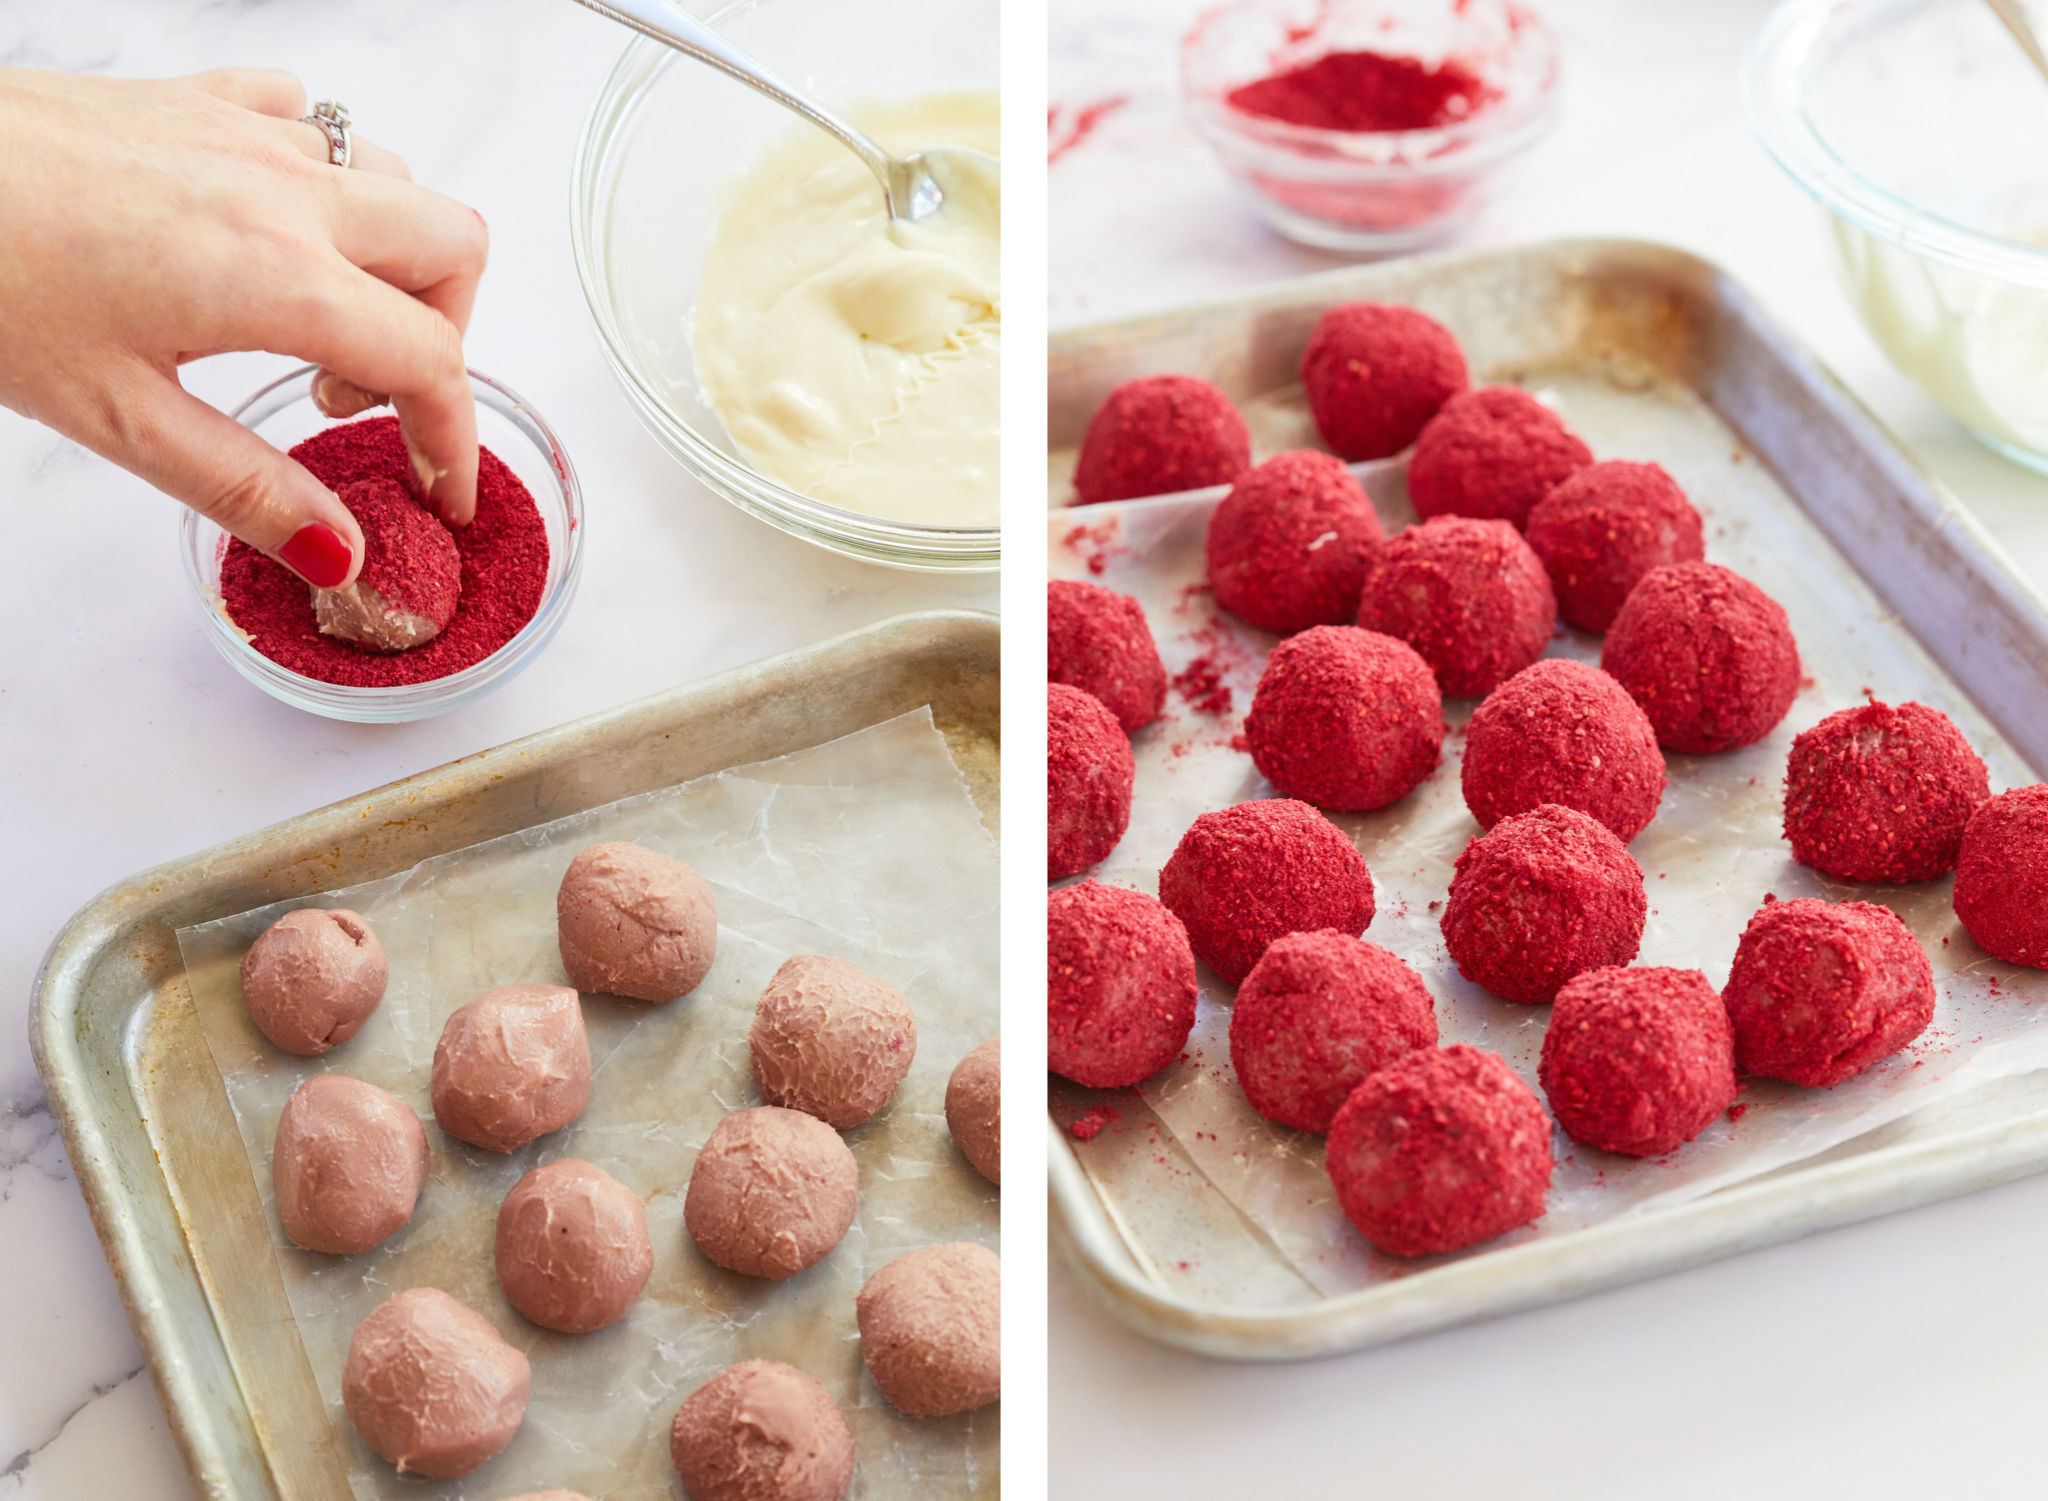 Coating the Ruby Chocolate Raspberry Truffles and returning them to a pan.